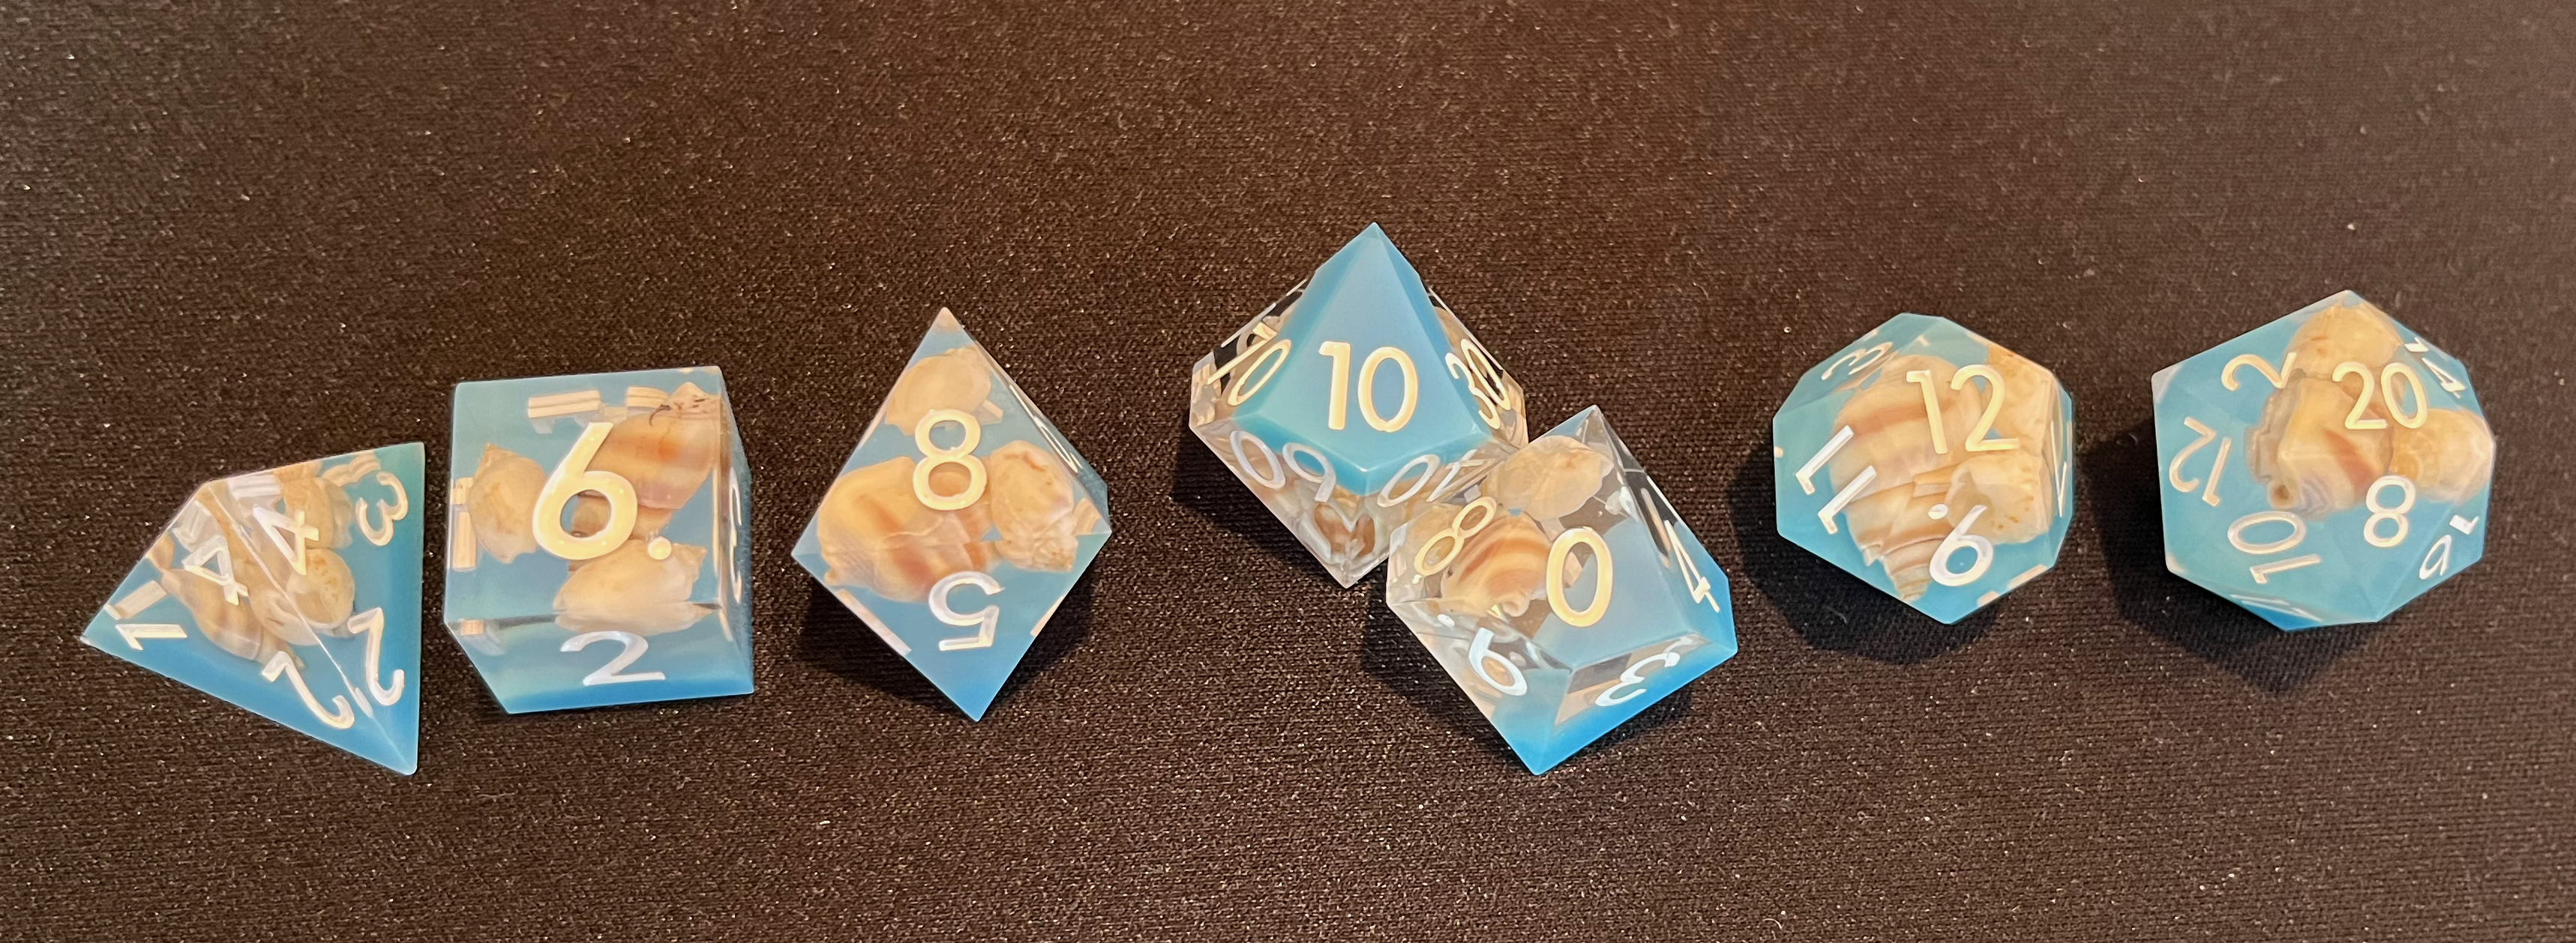 A set of 7 sharp-edged resin dice seen from above, partly transparent, partly translucent-to-opaque with an ocean blue color, and partly filled with tiny white seashells. They are inked with bright, easily readable white font.